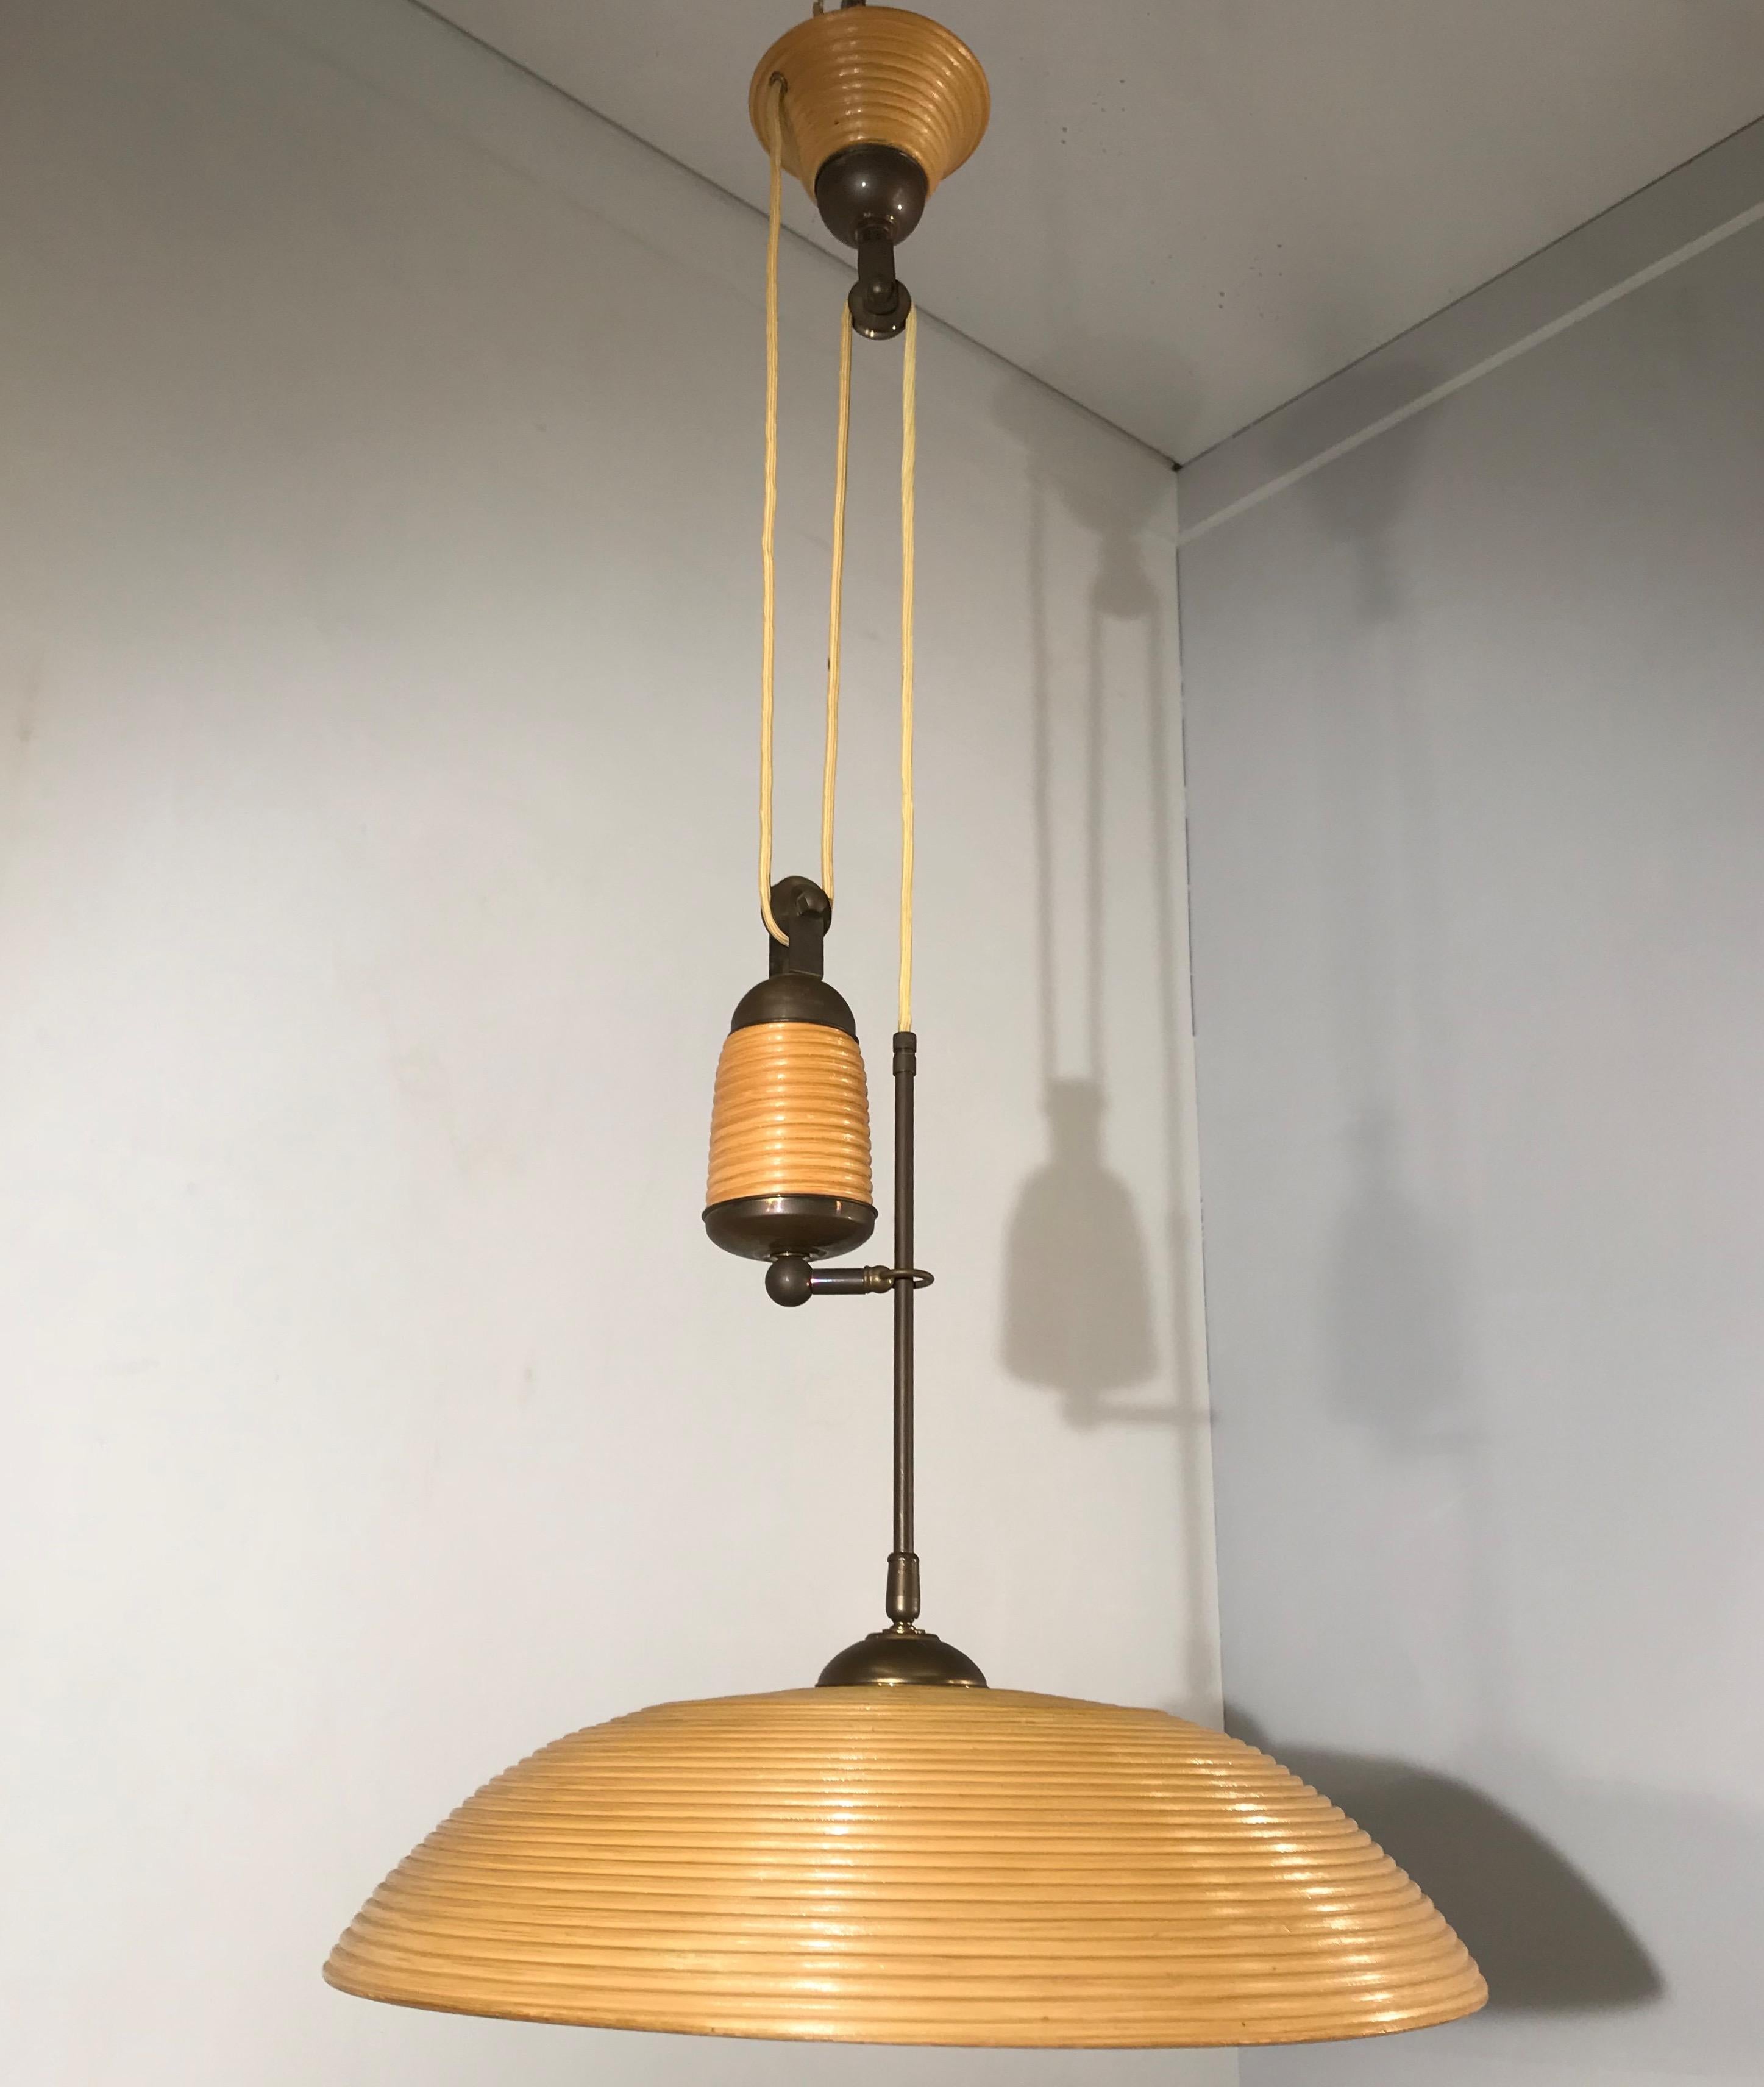 Stylish midcentury ceiling lamp.

This rare 1970s light fixture is perfect for bringing good style and the perfect light to your midcentury kitchen, hallway, living room, landing etc. This pendant comes with a beautifully shaped, rattan shade with